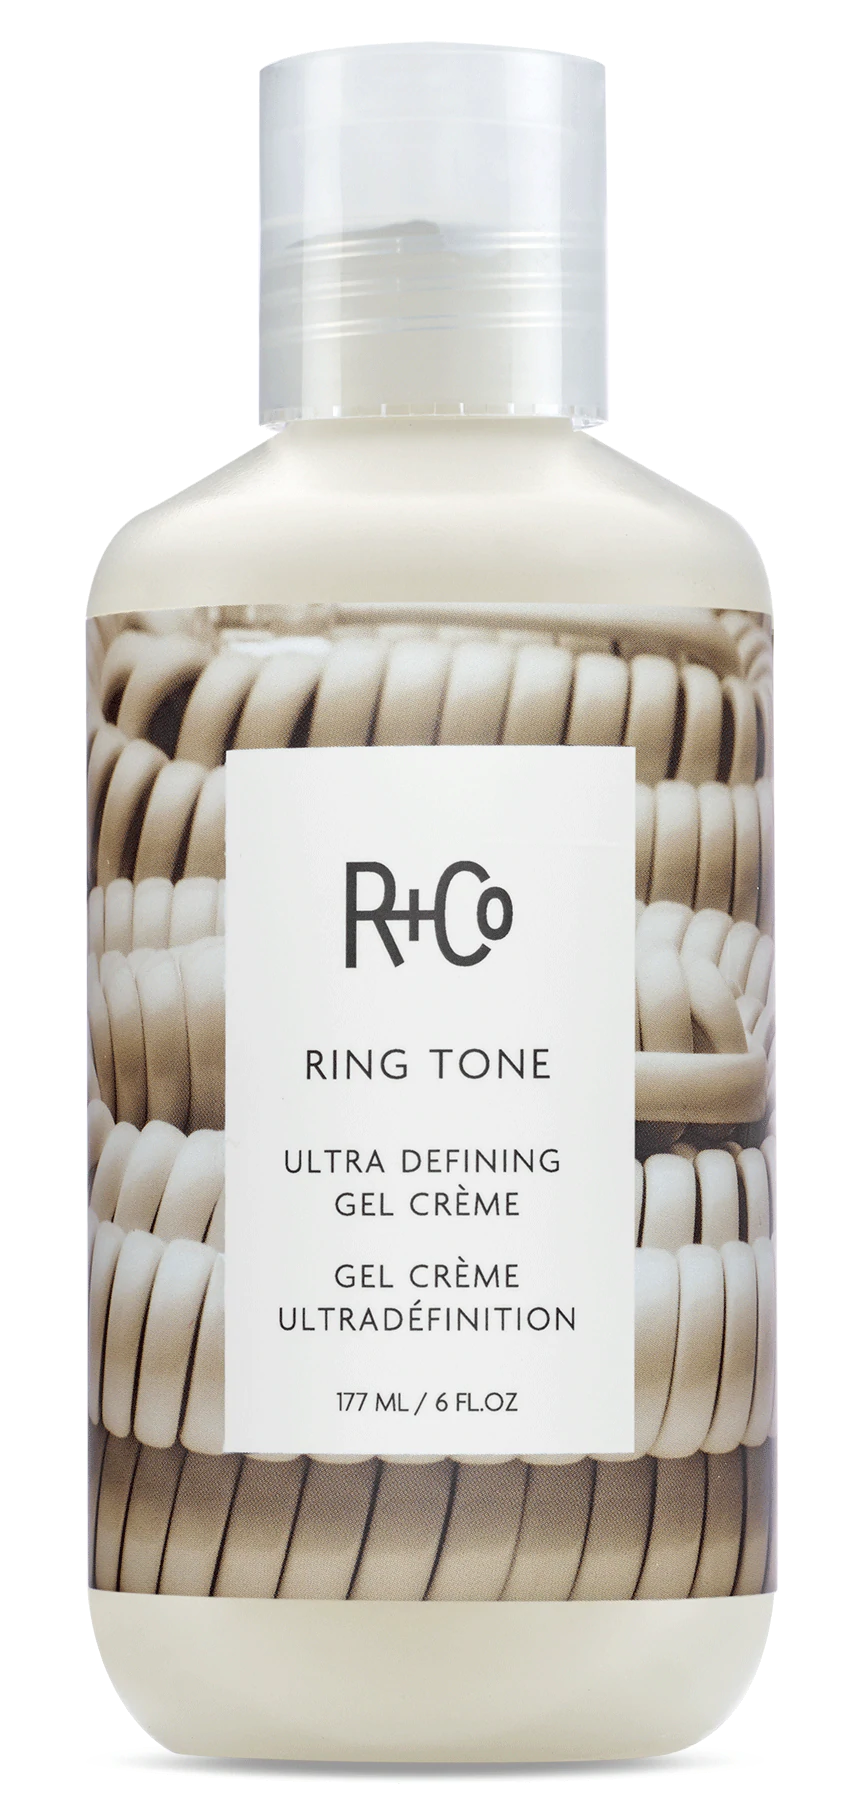 R + CO Ring Tone - Totality Medispa and Skincare